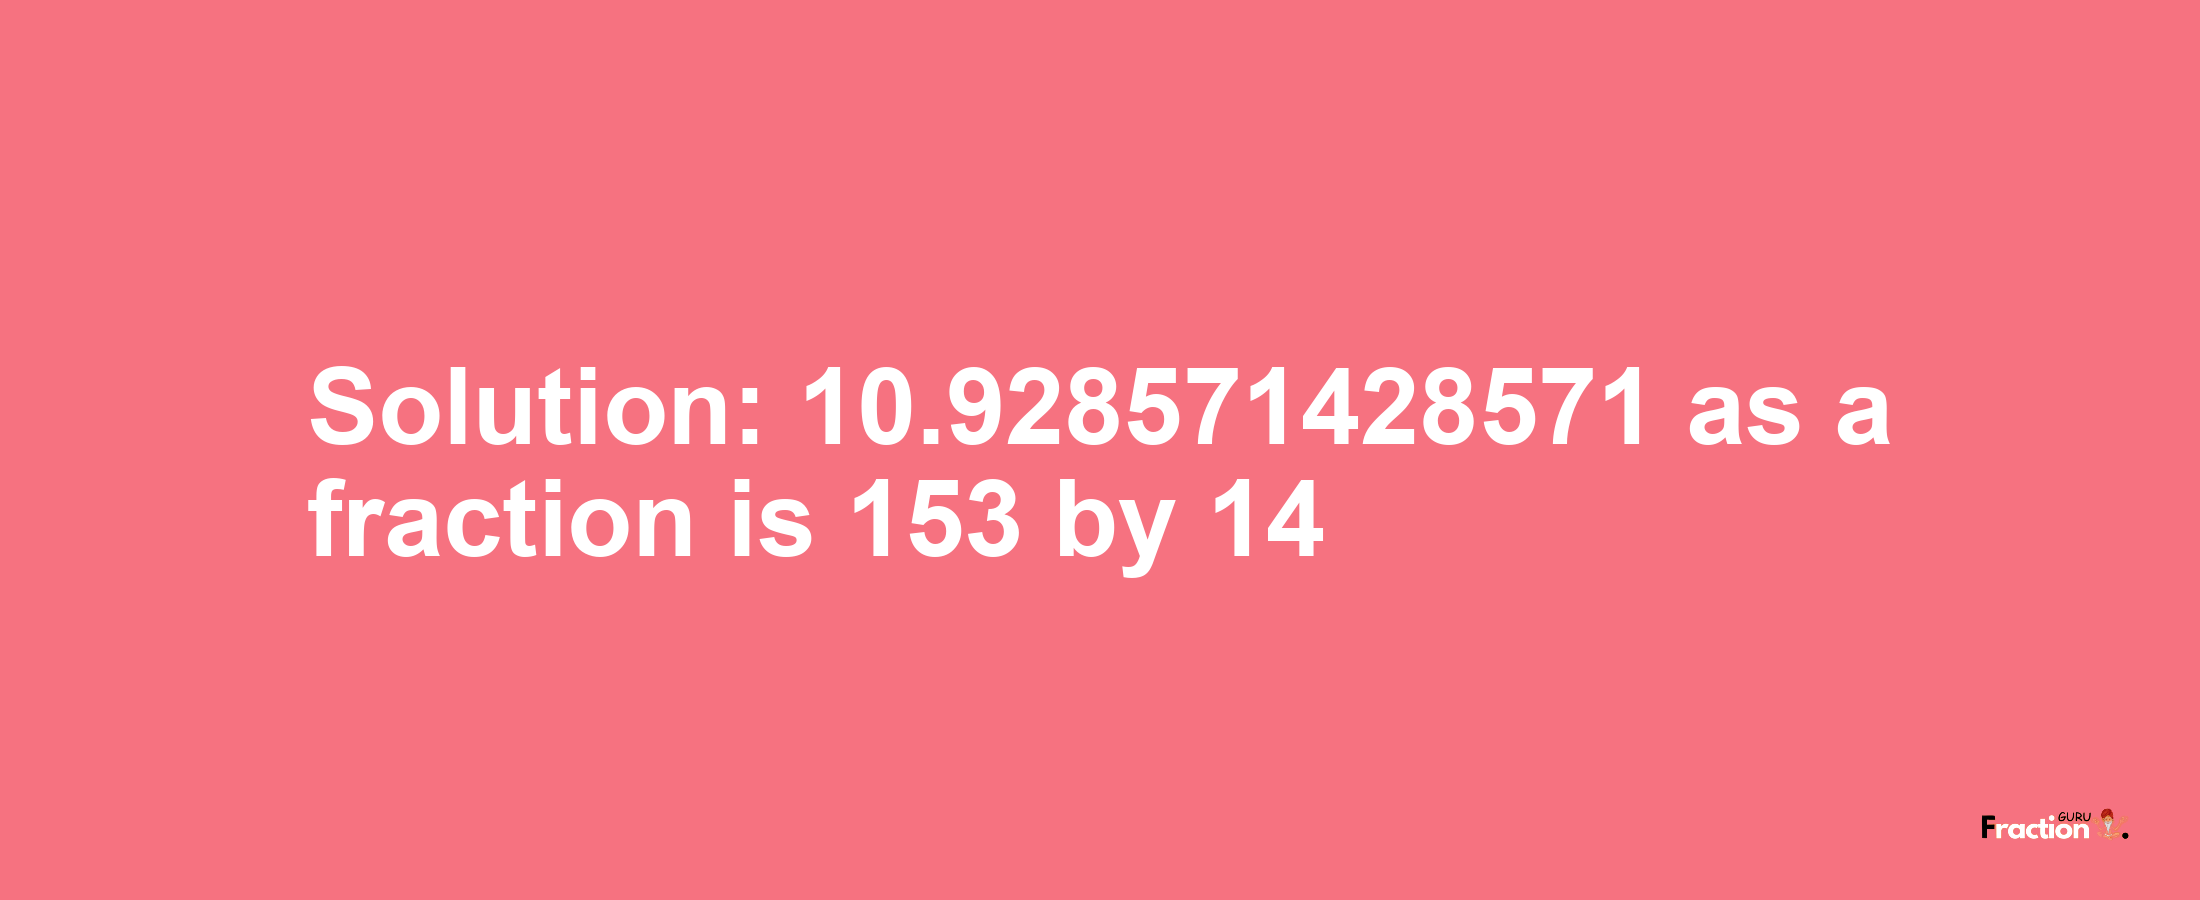 Solution:10.928571428571 as a fraction is 153/14